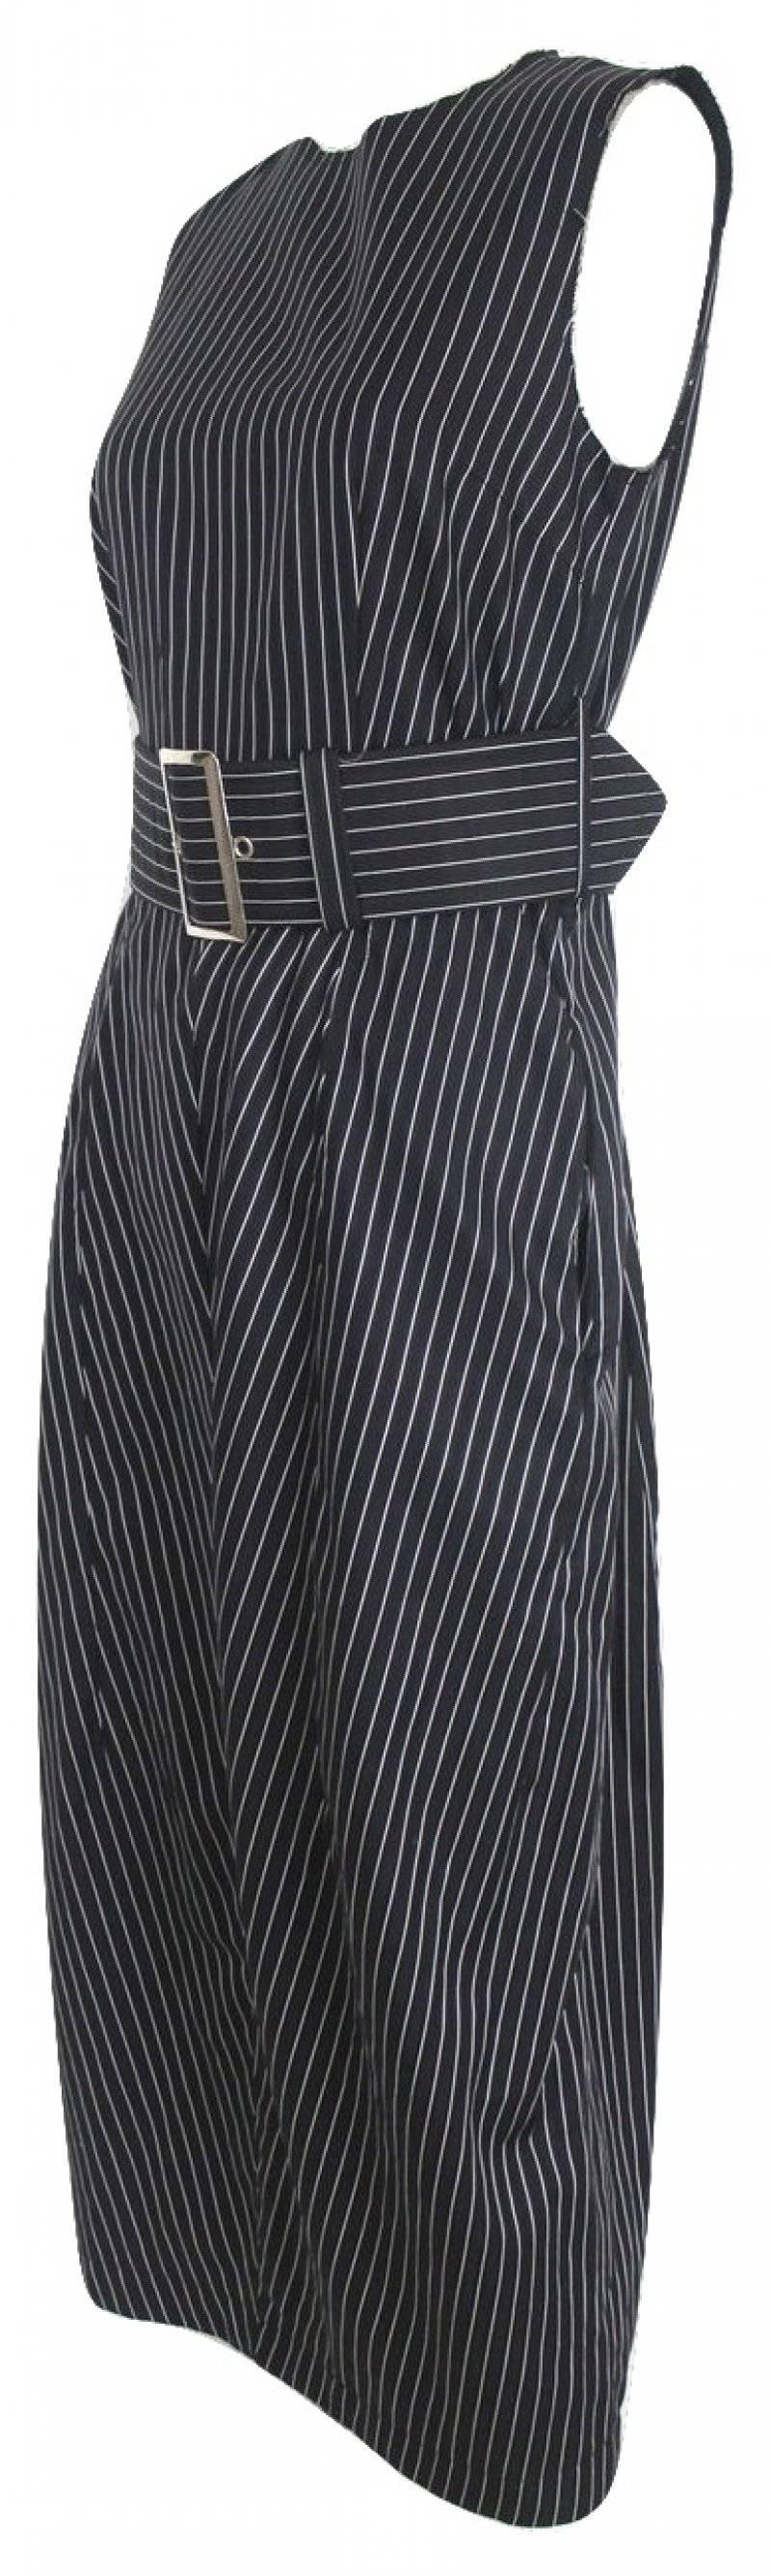 Comme des Garcons 2010 Collection Runway Pinstripe Dress 1